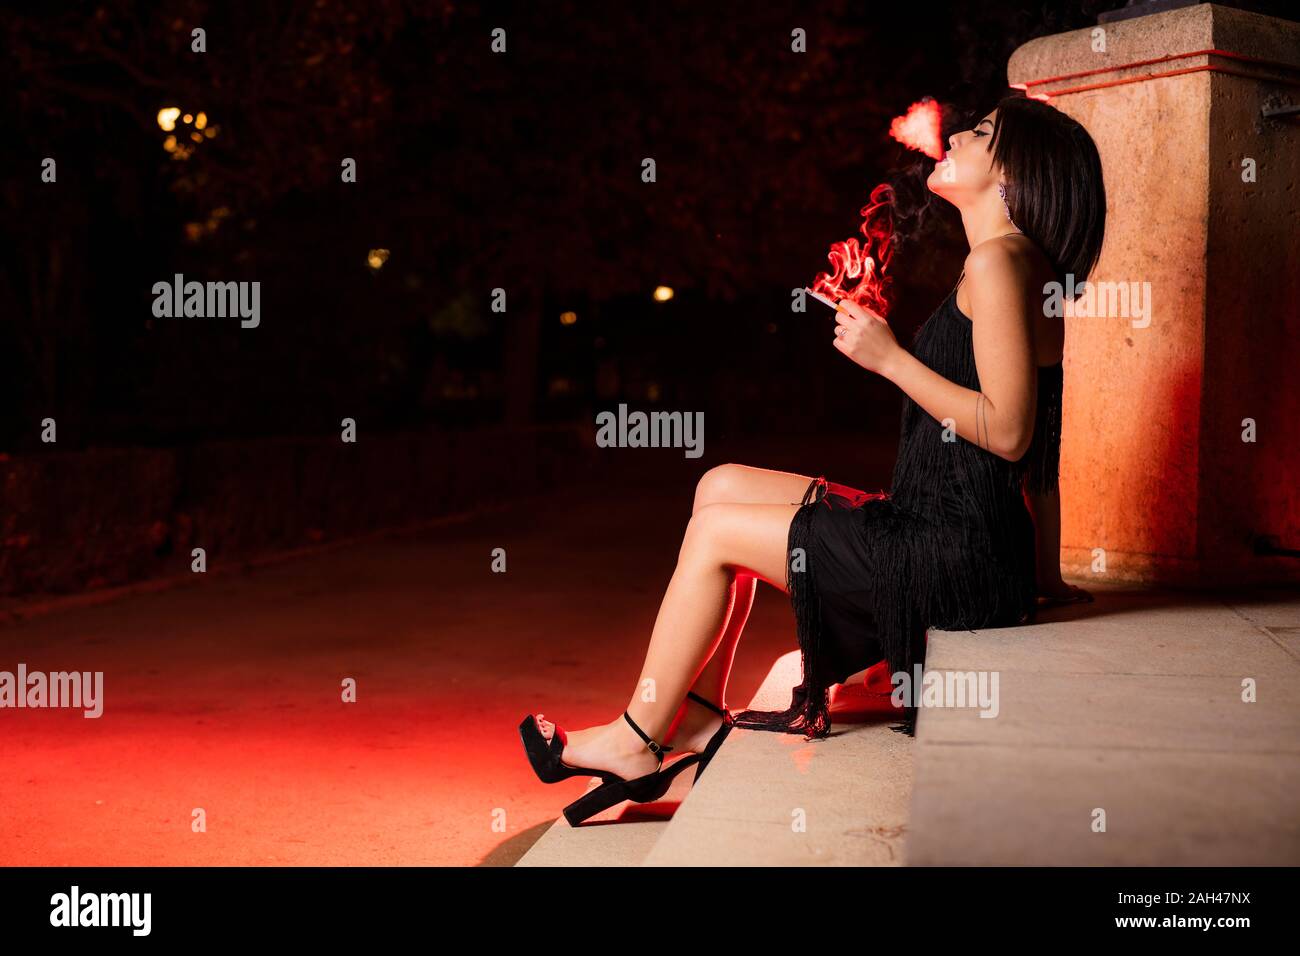 Smoking young woman wearing black evening dress sitting on stairs at night Stock Photo